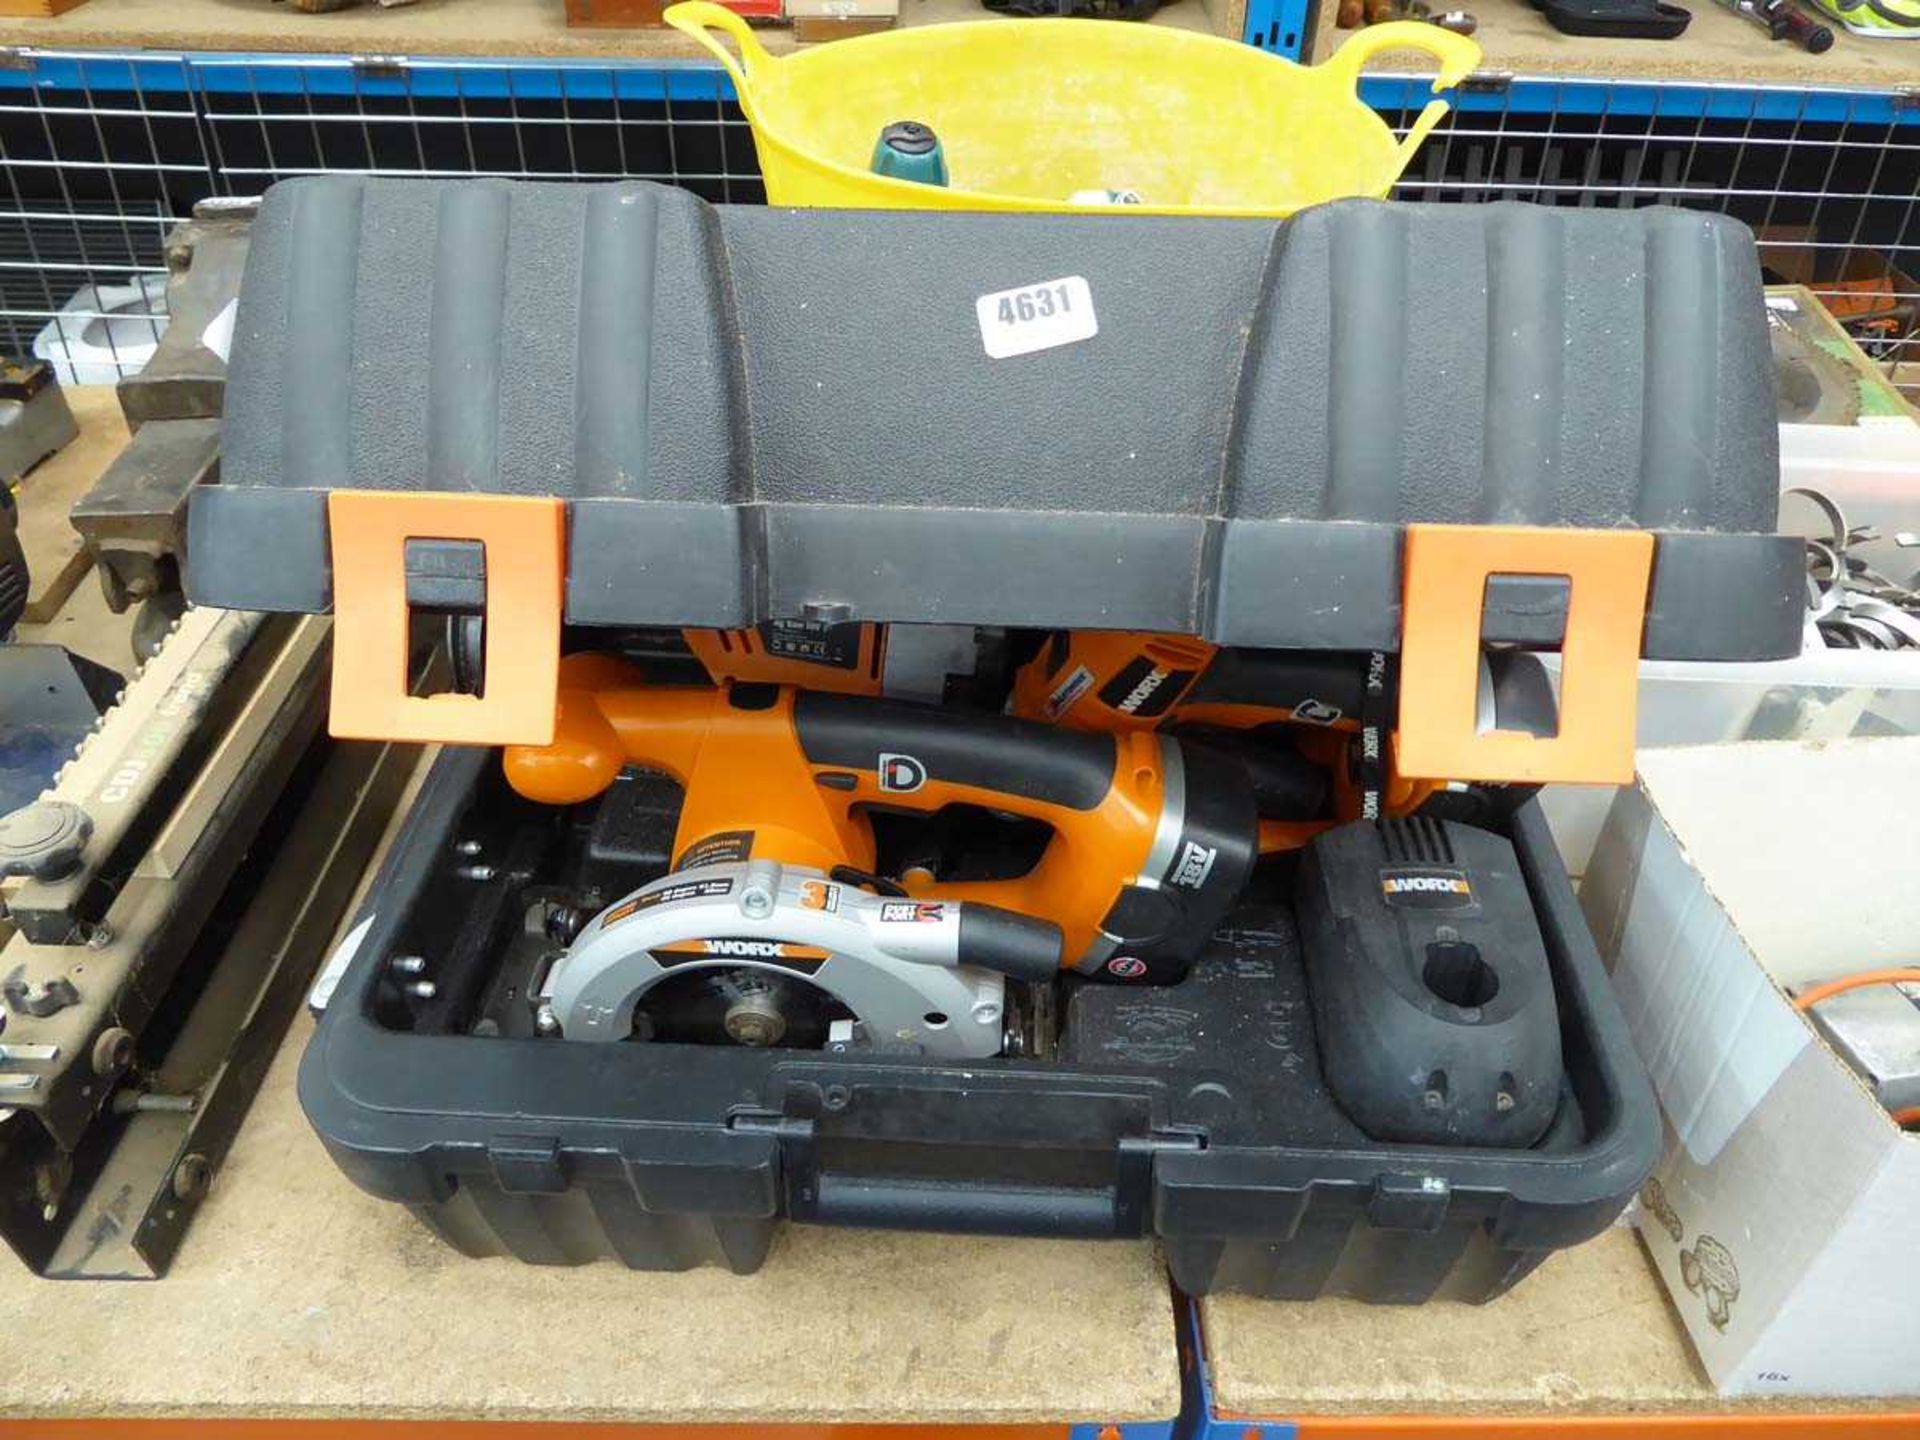 Worx multi toolbox with one battery and charger, to include drills, jigsaws, and circular saw - Image 2 of 2